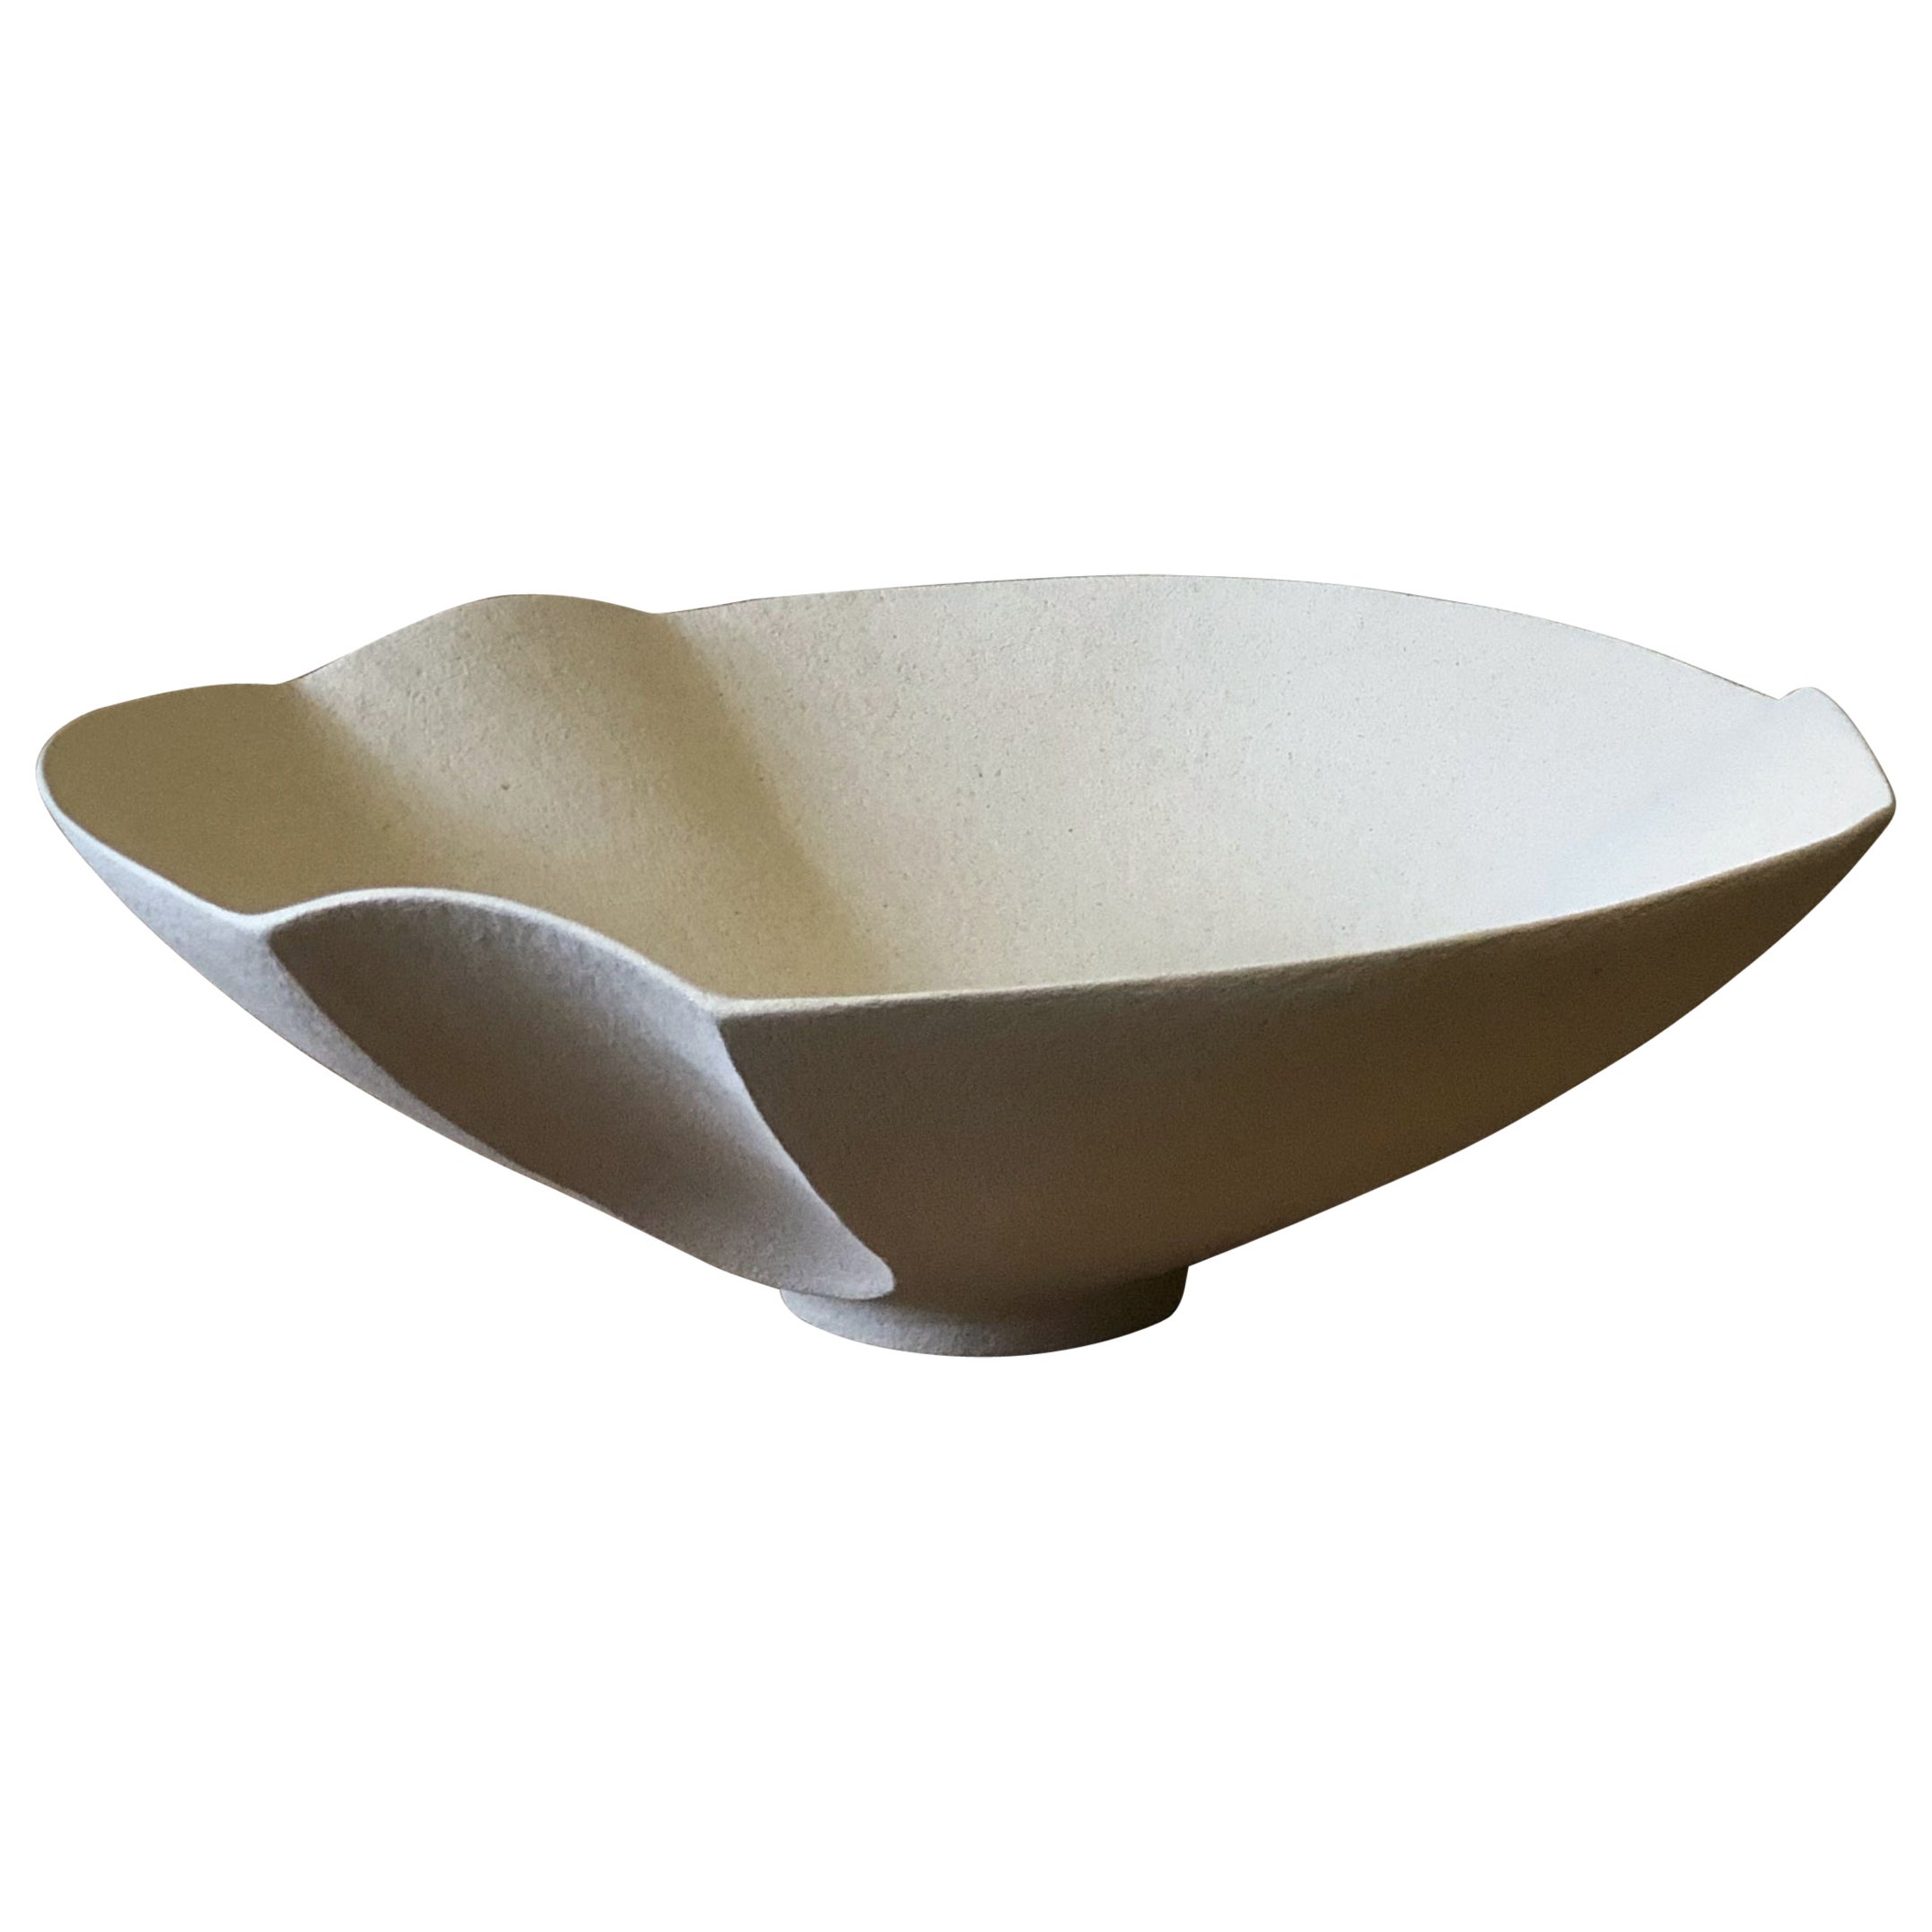 Faceted Low Bowl by Sophie Vaidie For Sale